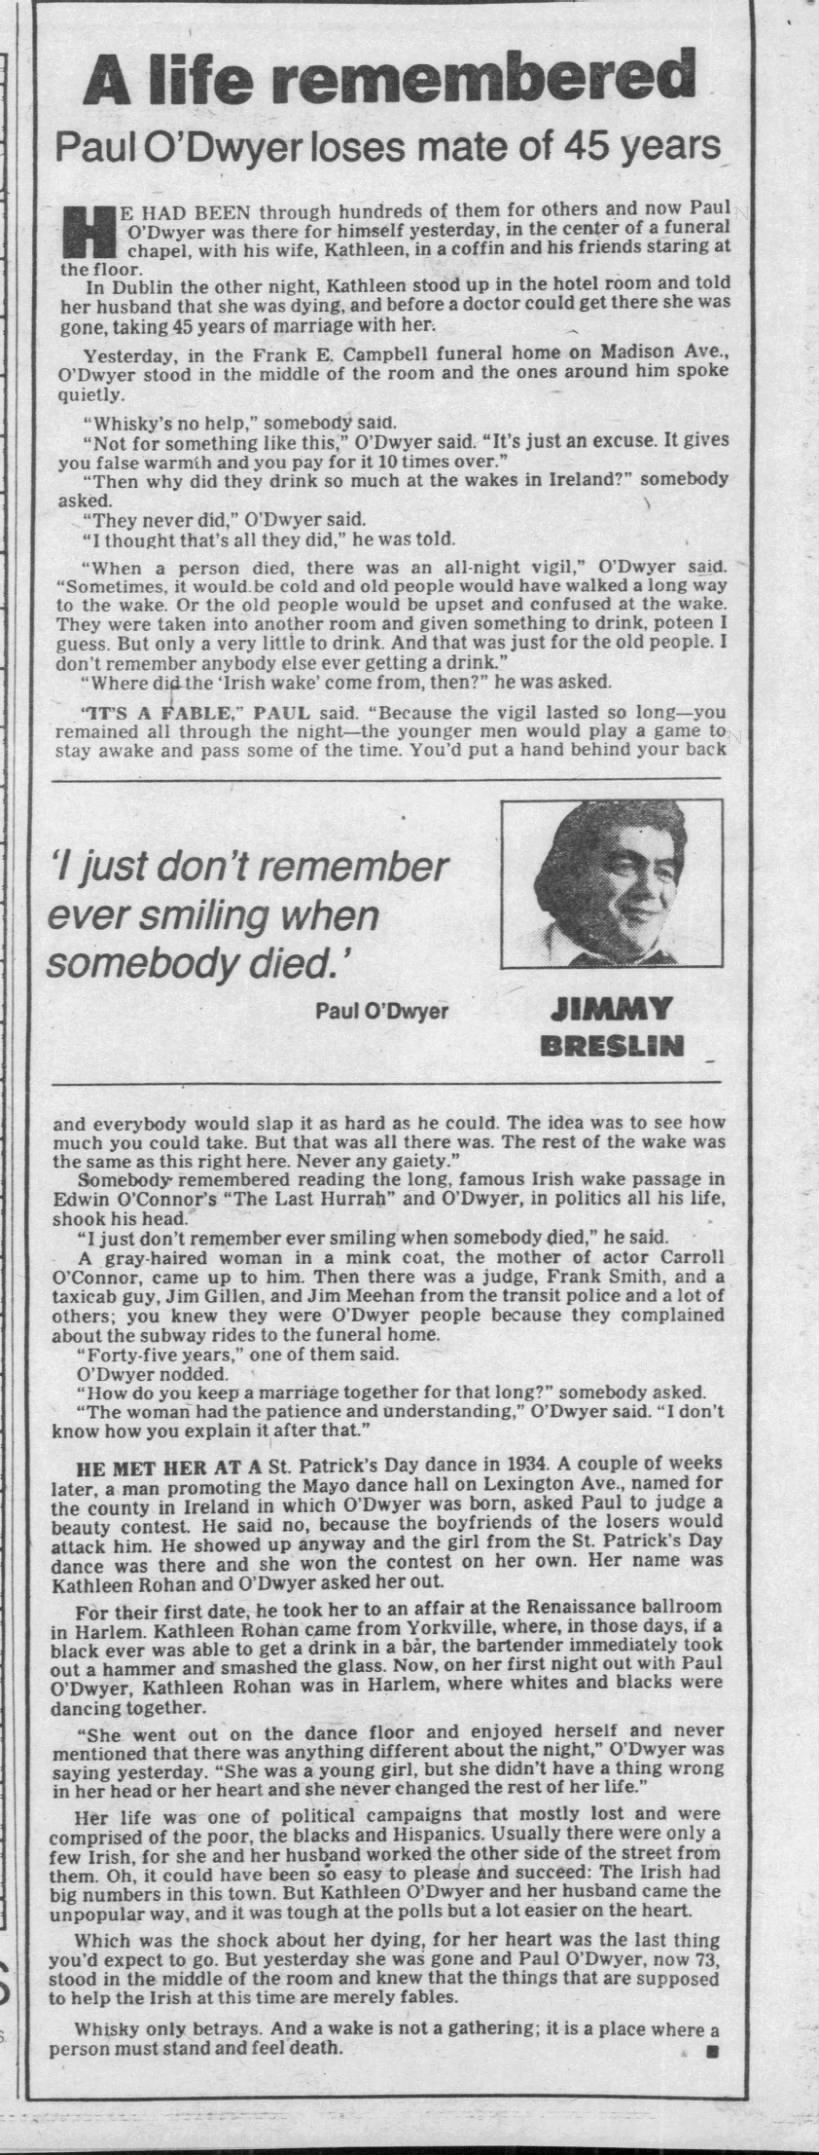 Jimmy Breslin, "A Life Remembered," Daily News, December 5, 1982, 6